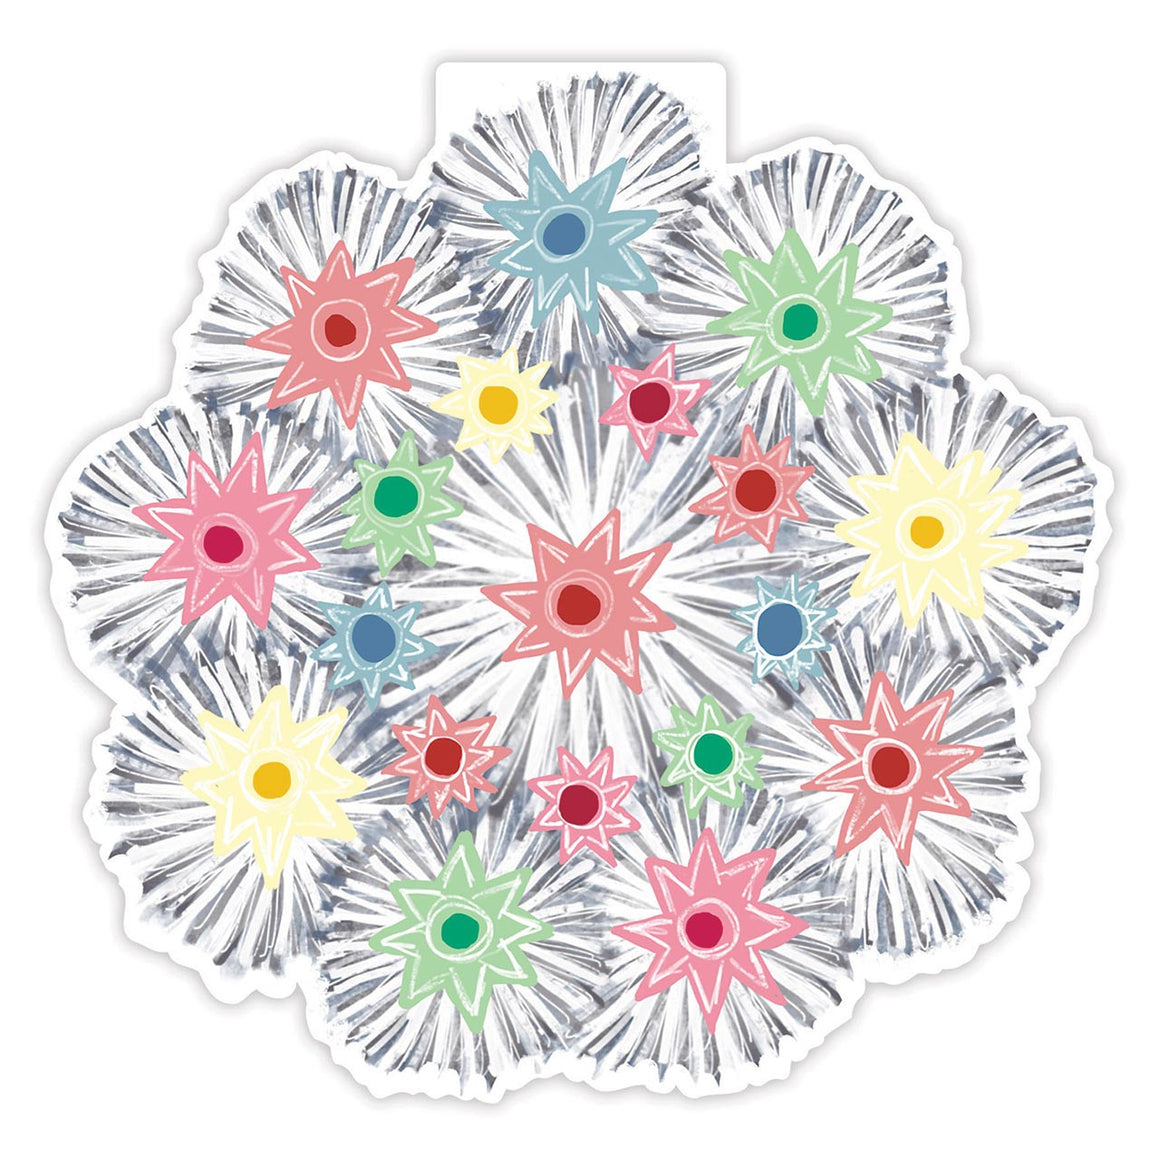 PLACEMATS - RETRO FIREWORKS & STARS (set of 24)